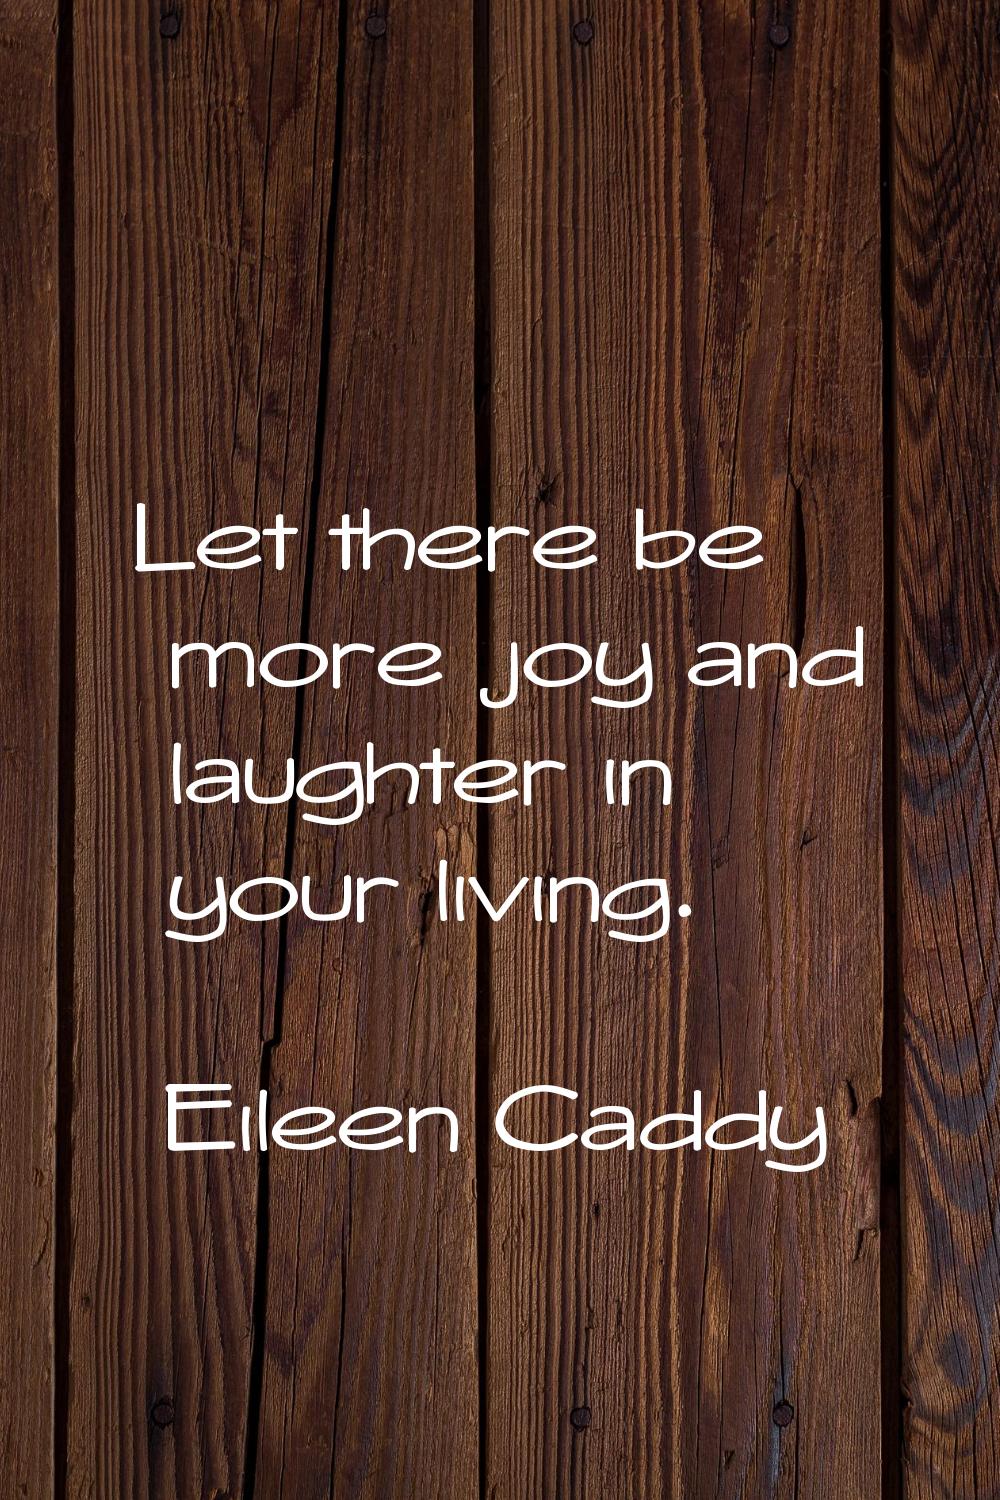 Let there be more joy and laughter in your living.